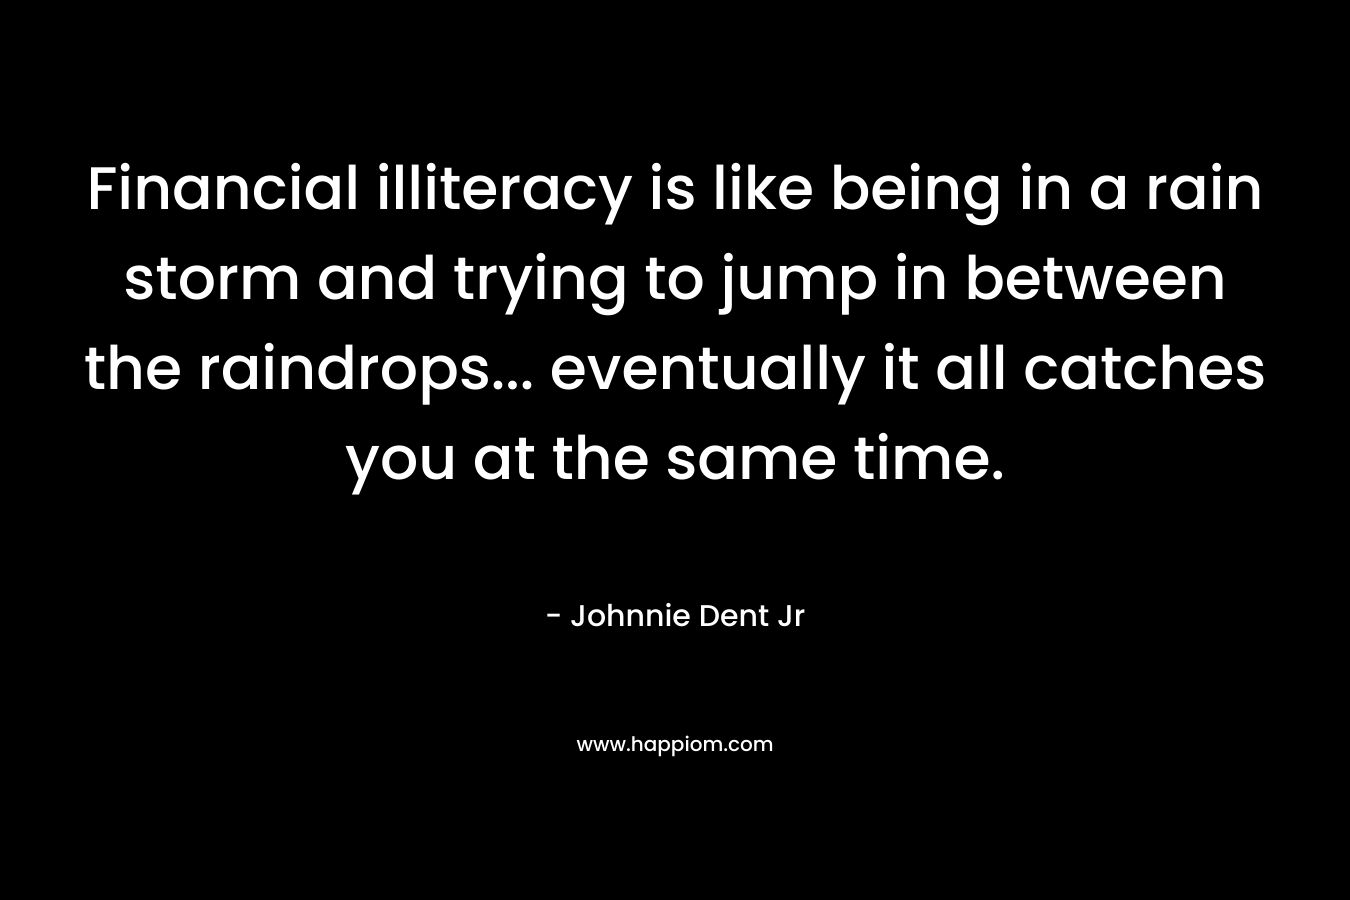 Financial illiteracy is like being in a rain storm and trying to jump in between the raindrops... eventually it all catches you at the same time.